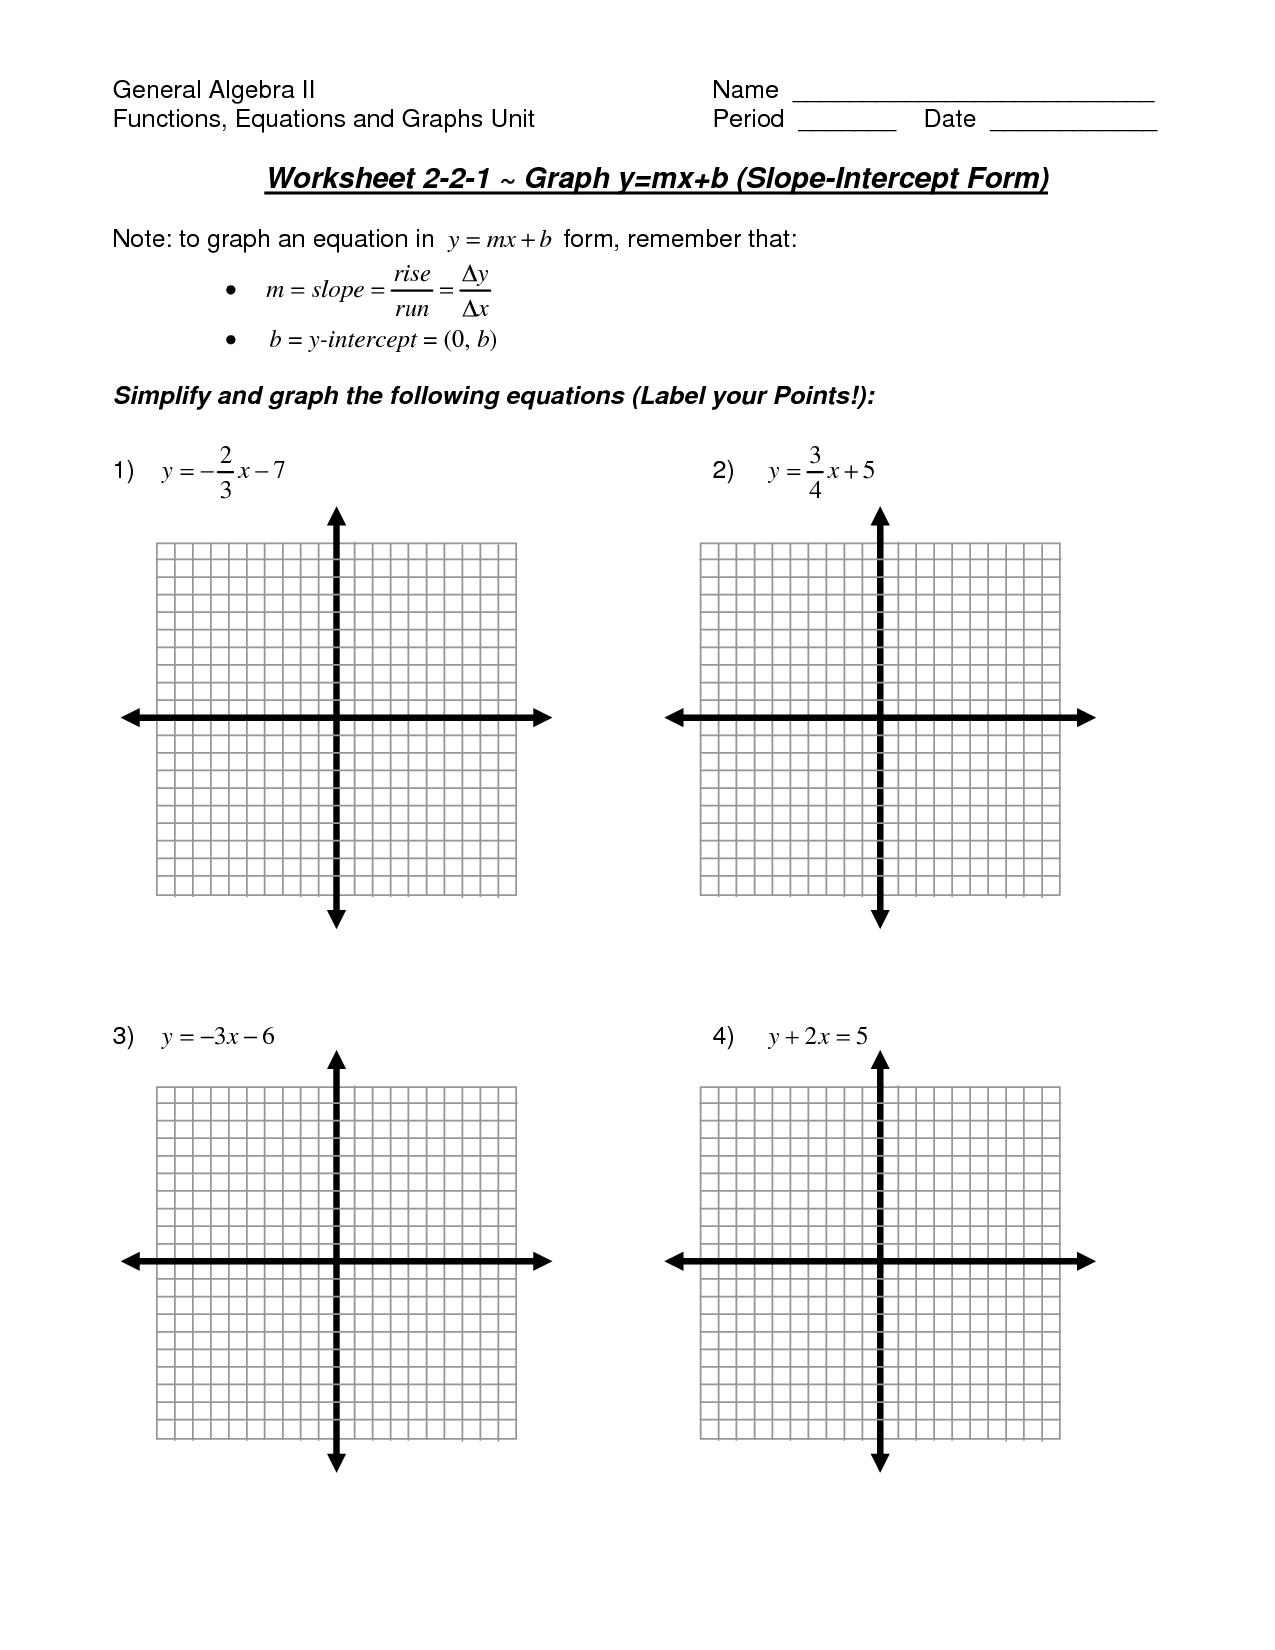 Graphing Linear Functions Worksheet Pdf